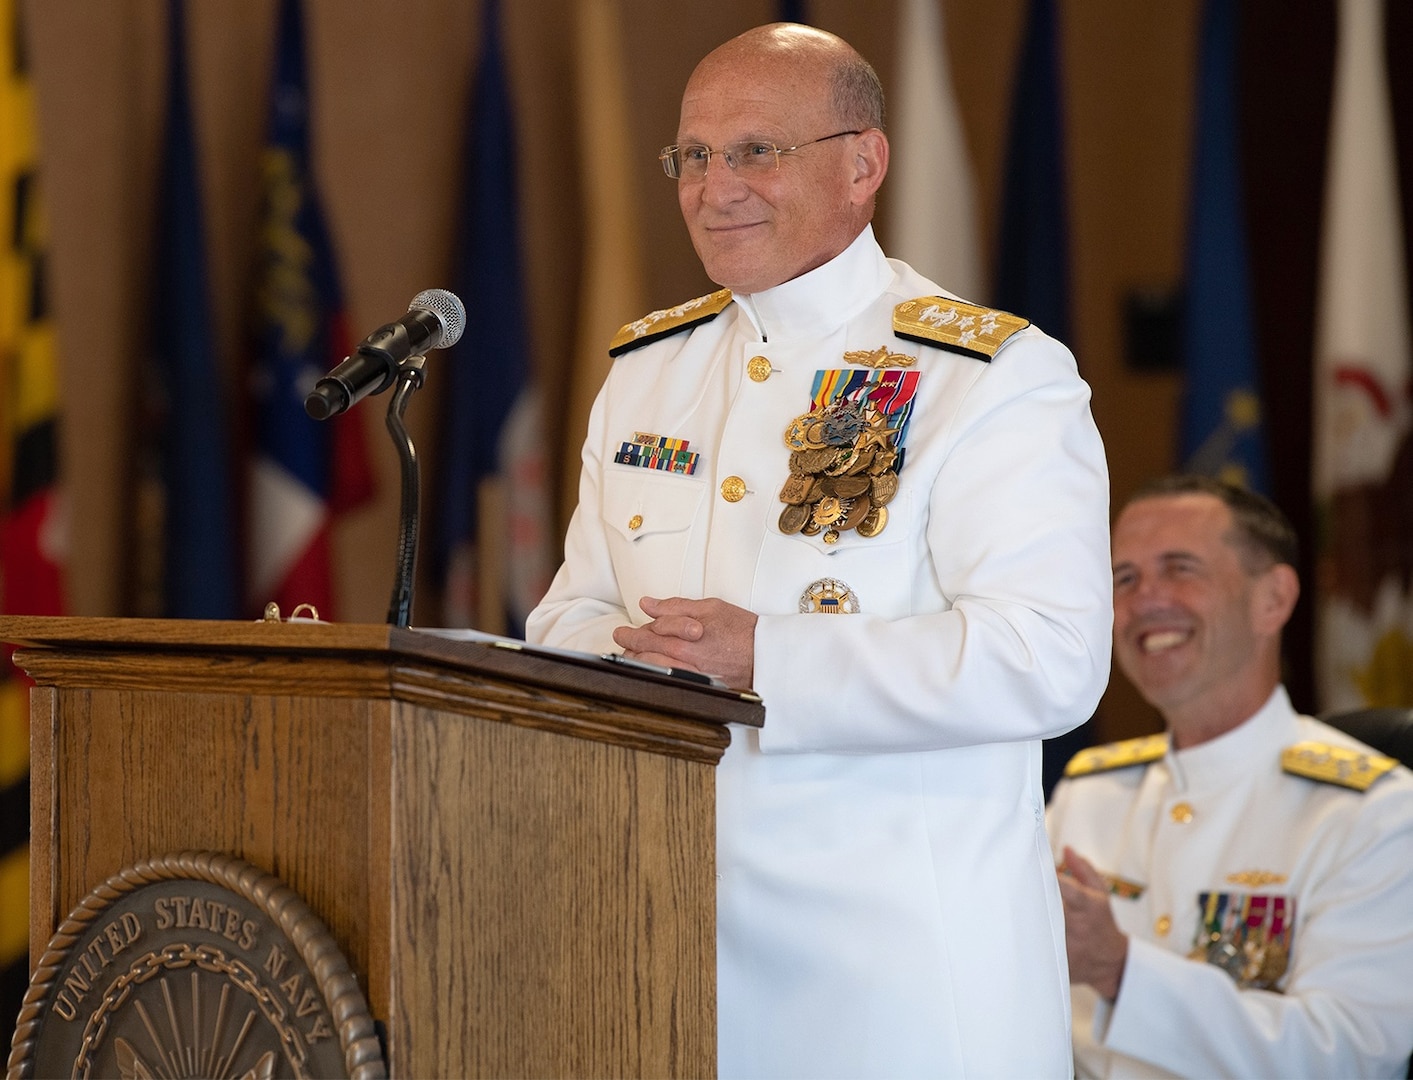 Navy Adm. Michael Gilday delivers his first remarks as the 32nd chief of naval operations during a change-of-office ceremony at the Washington Navy Yard, Aug. 22, 2019.